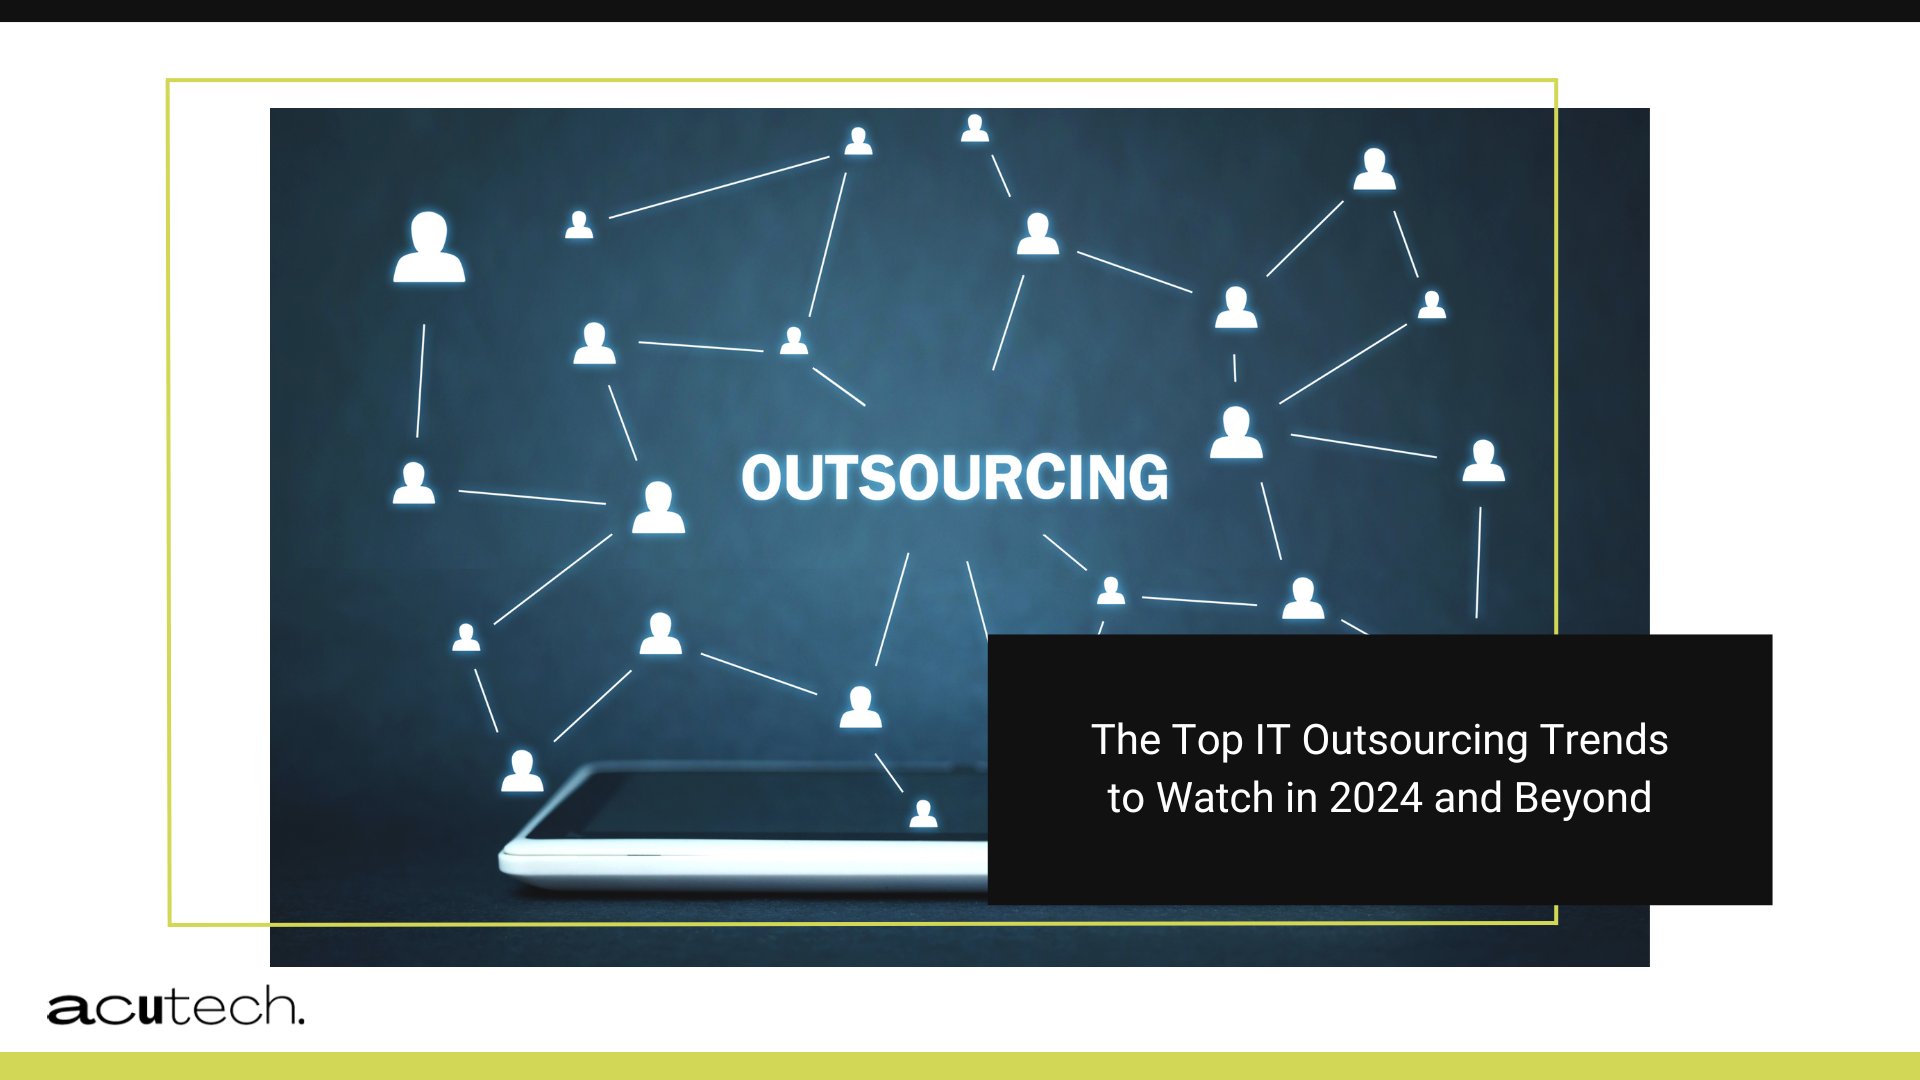 The Top IT Outsourcing Trends to Watch in 2024 and Beyond